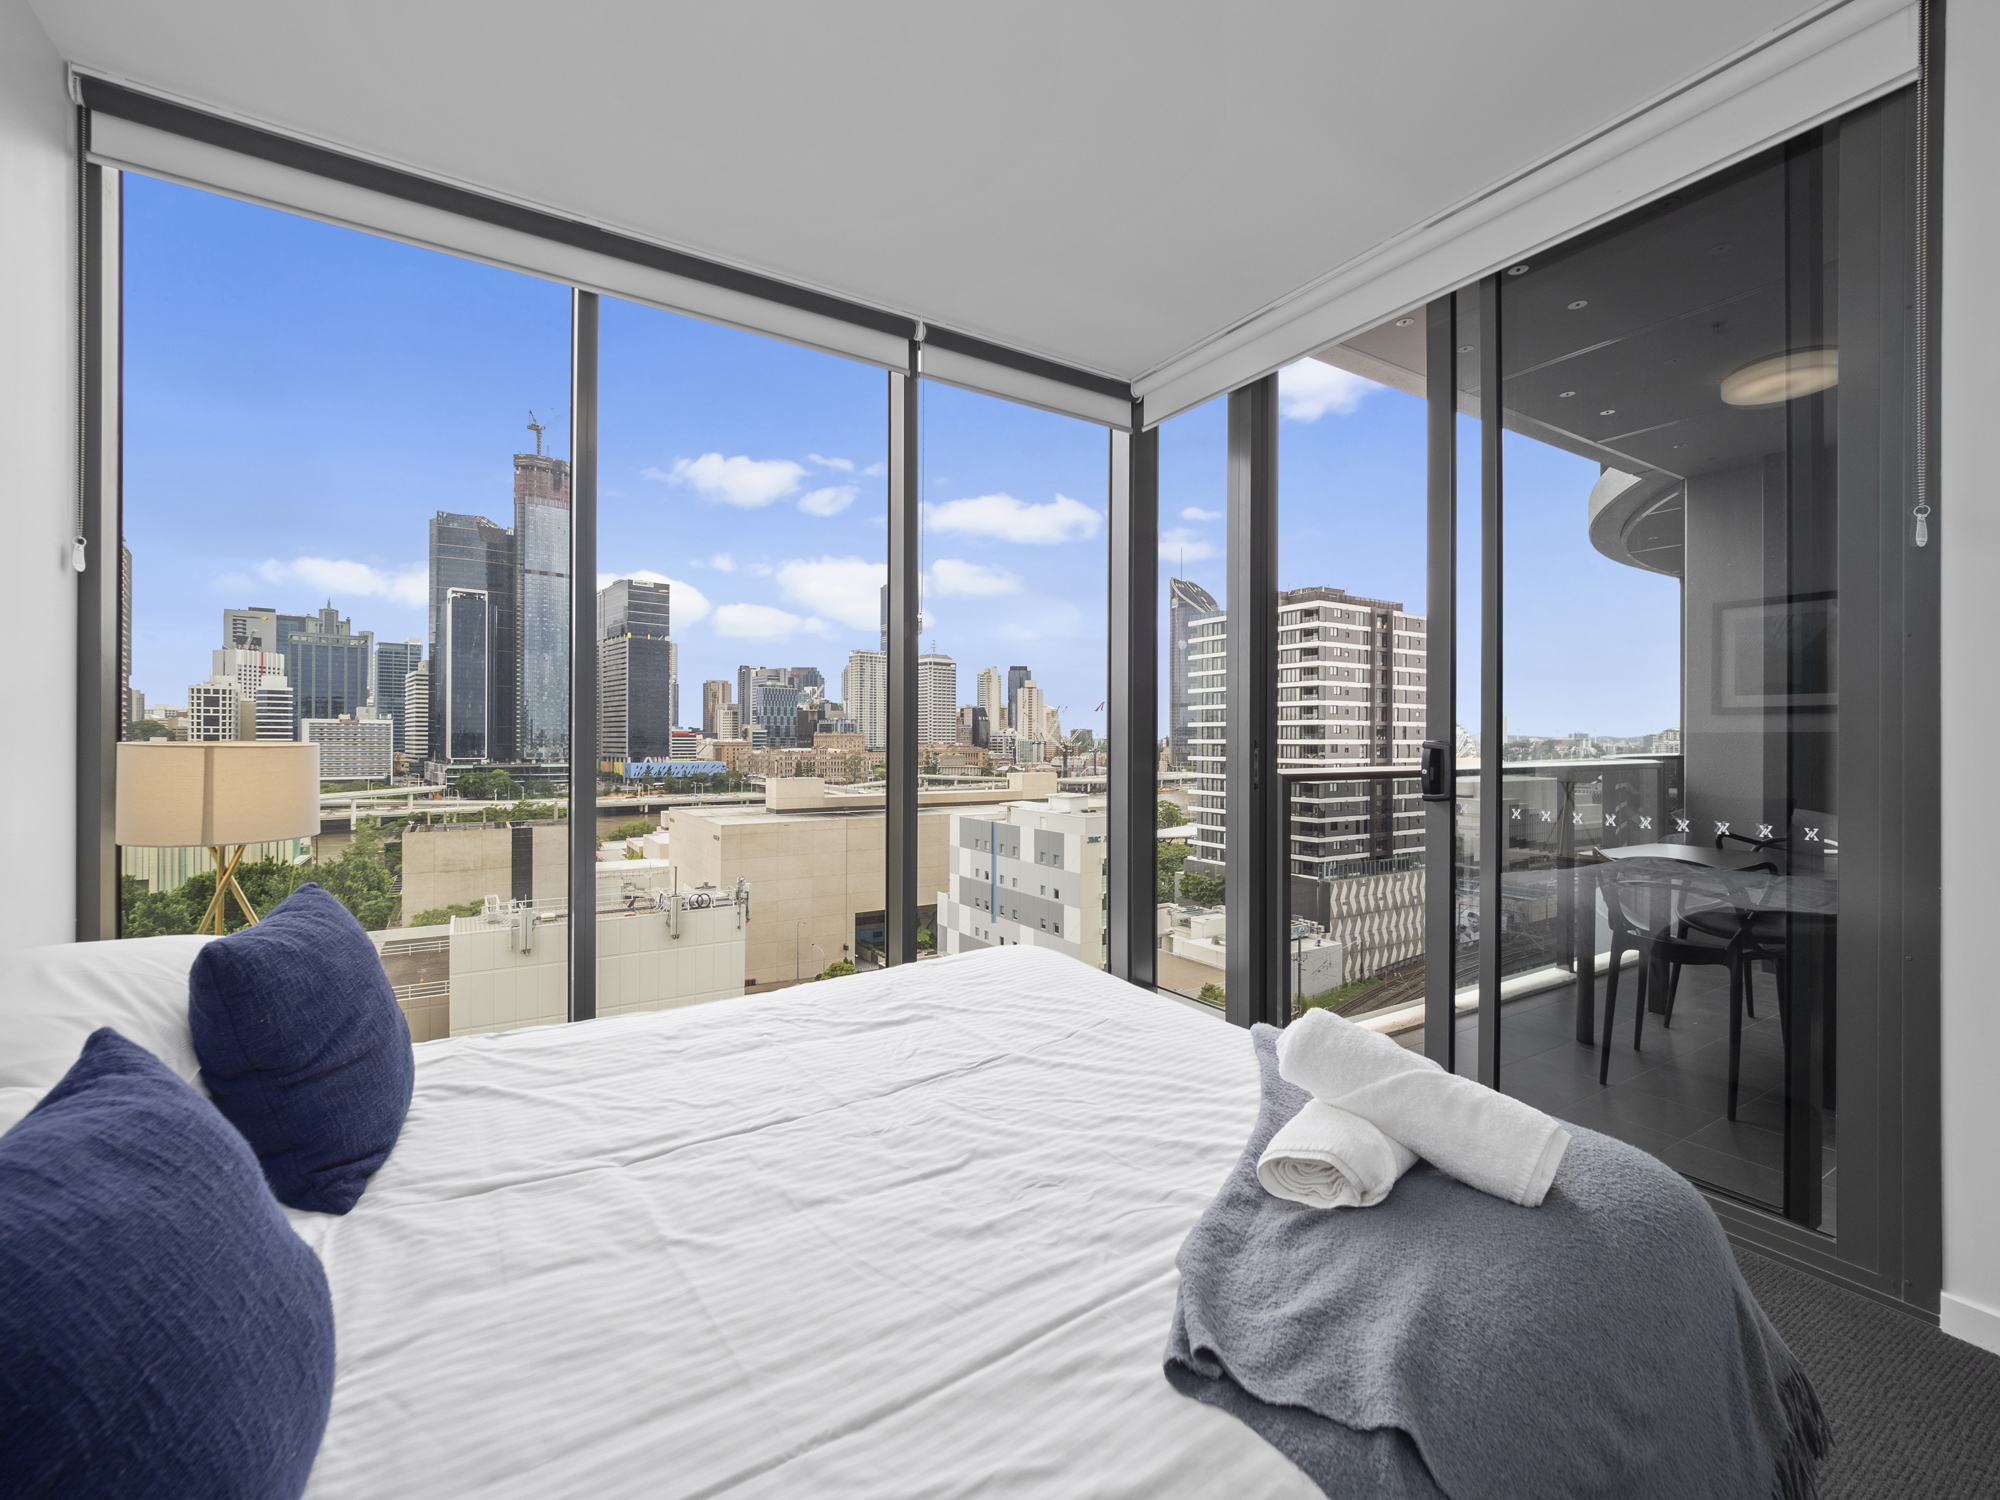 Apartment photography at 38 Hope St South Brisbane